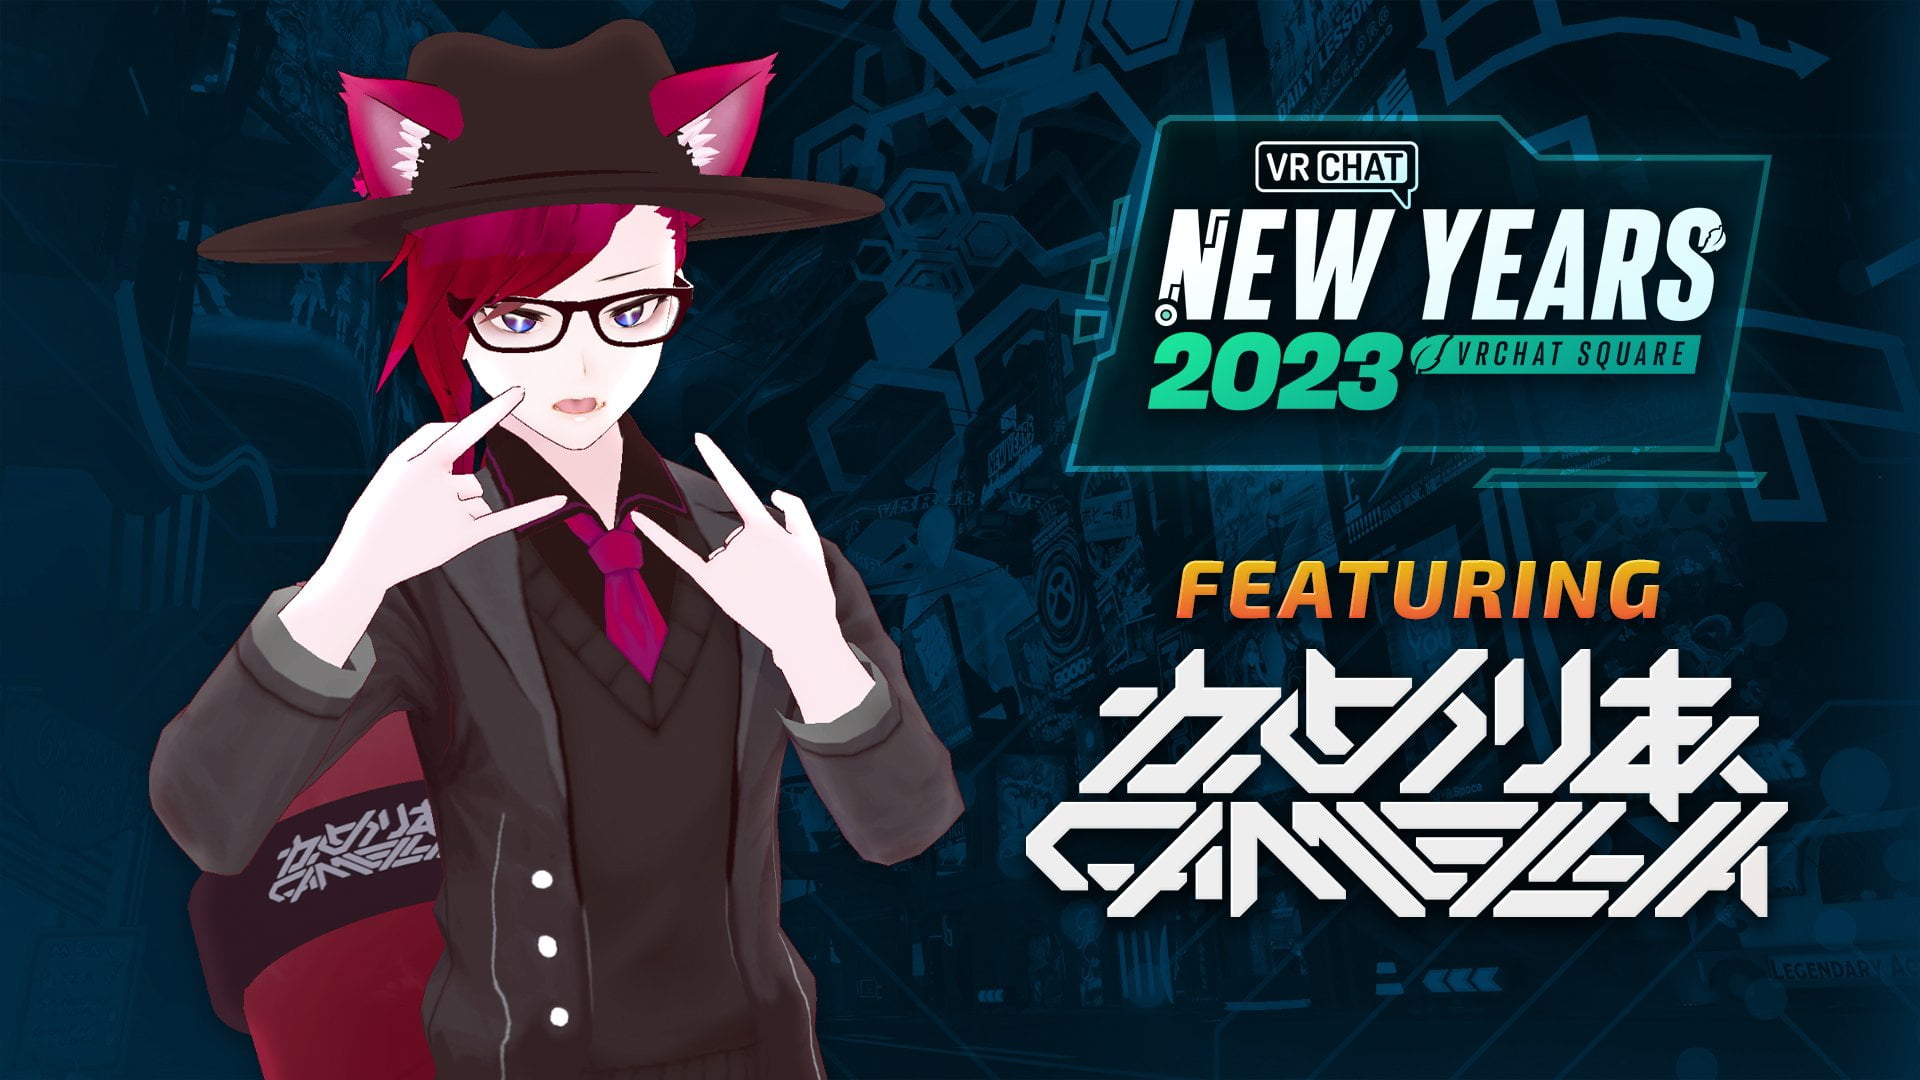 VRChat's New Year's Eve party is probably the most metaverse-like event of the year